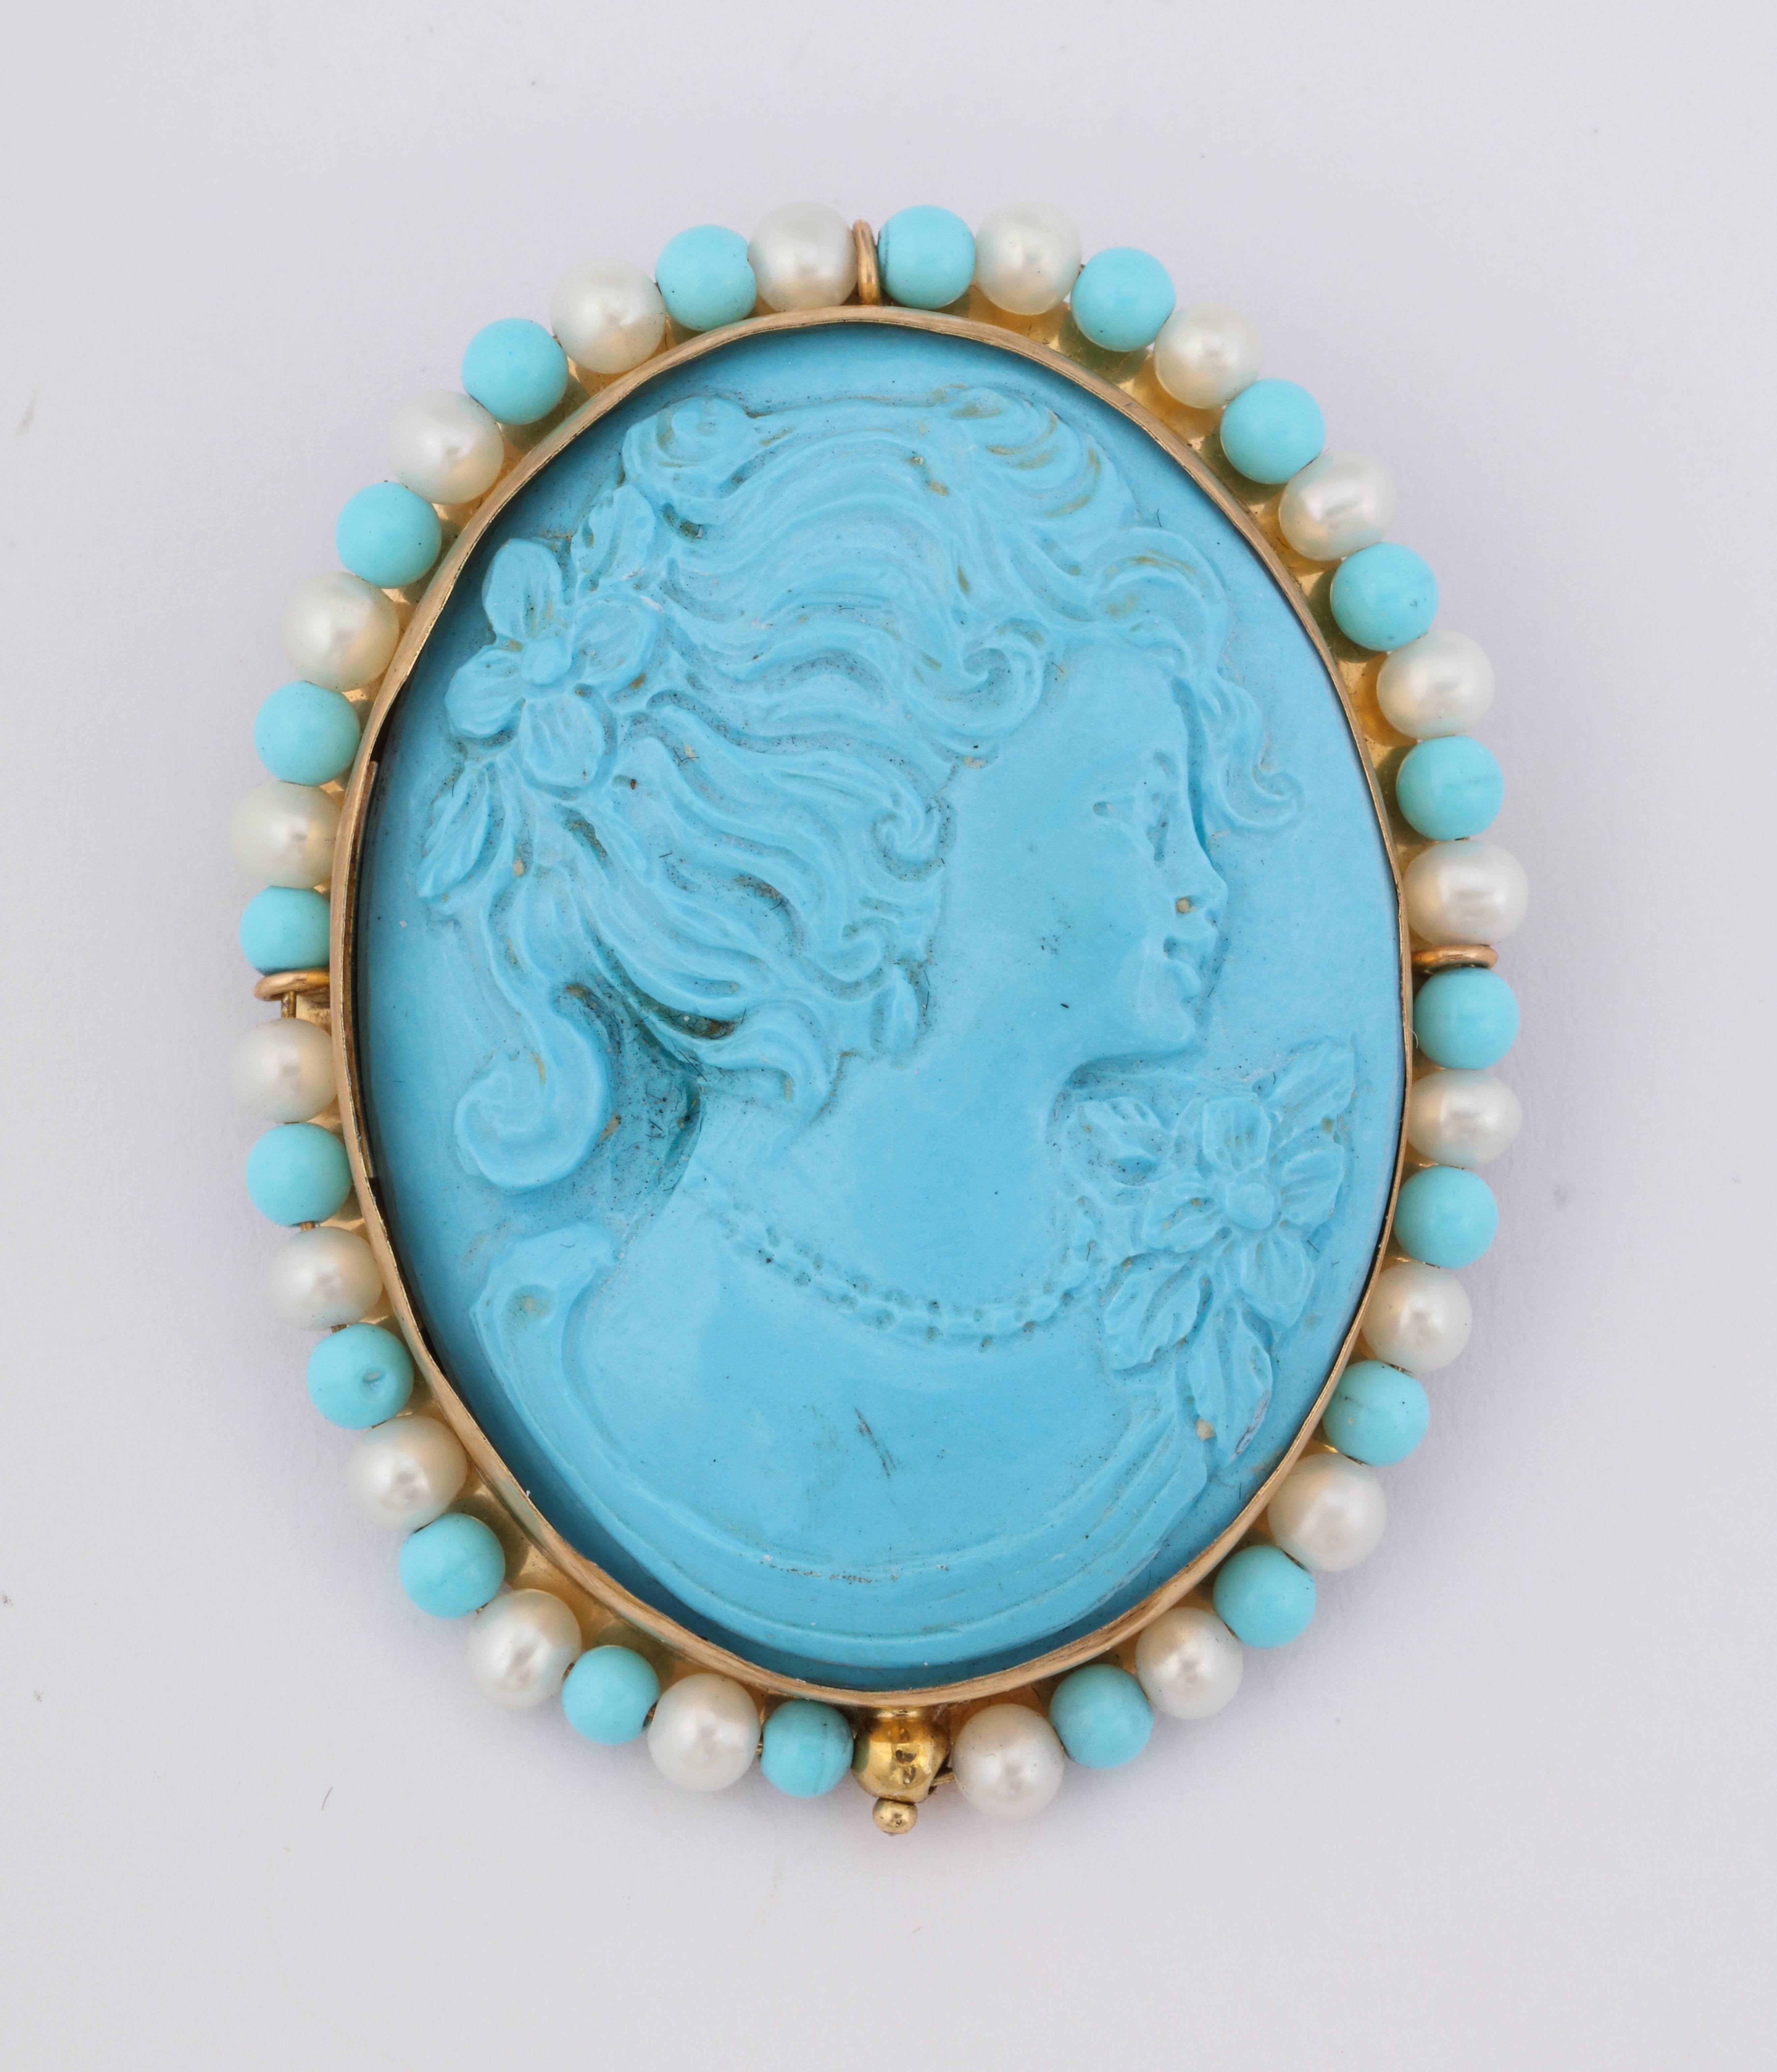 40mm Turquoise shell cameo hand-carved,14Kt yellow gold, turquoise and fresh water pearls brooch/pendant.